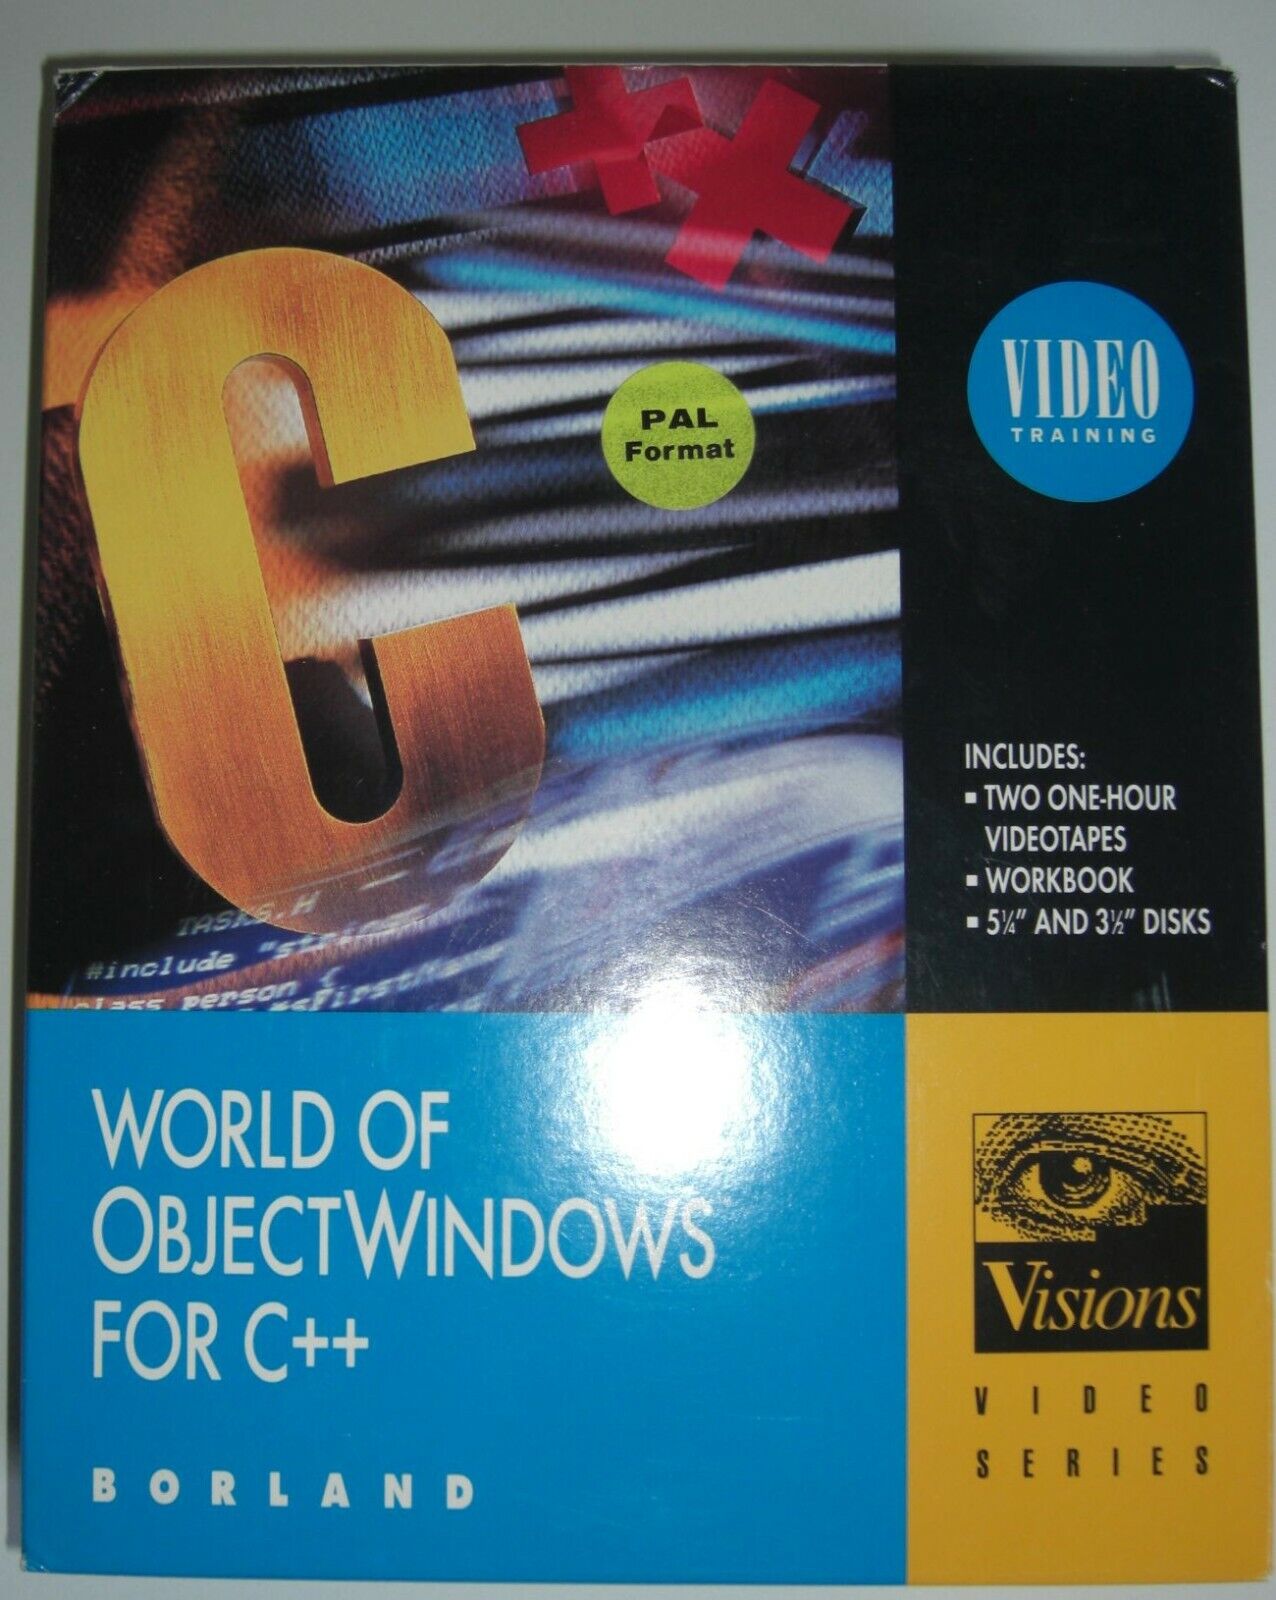 Borland World of ObjectWindows for C++ Video Training (PAL Format)